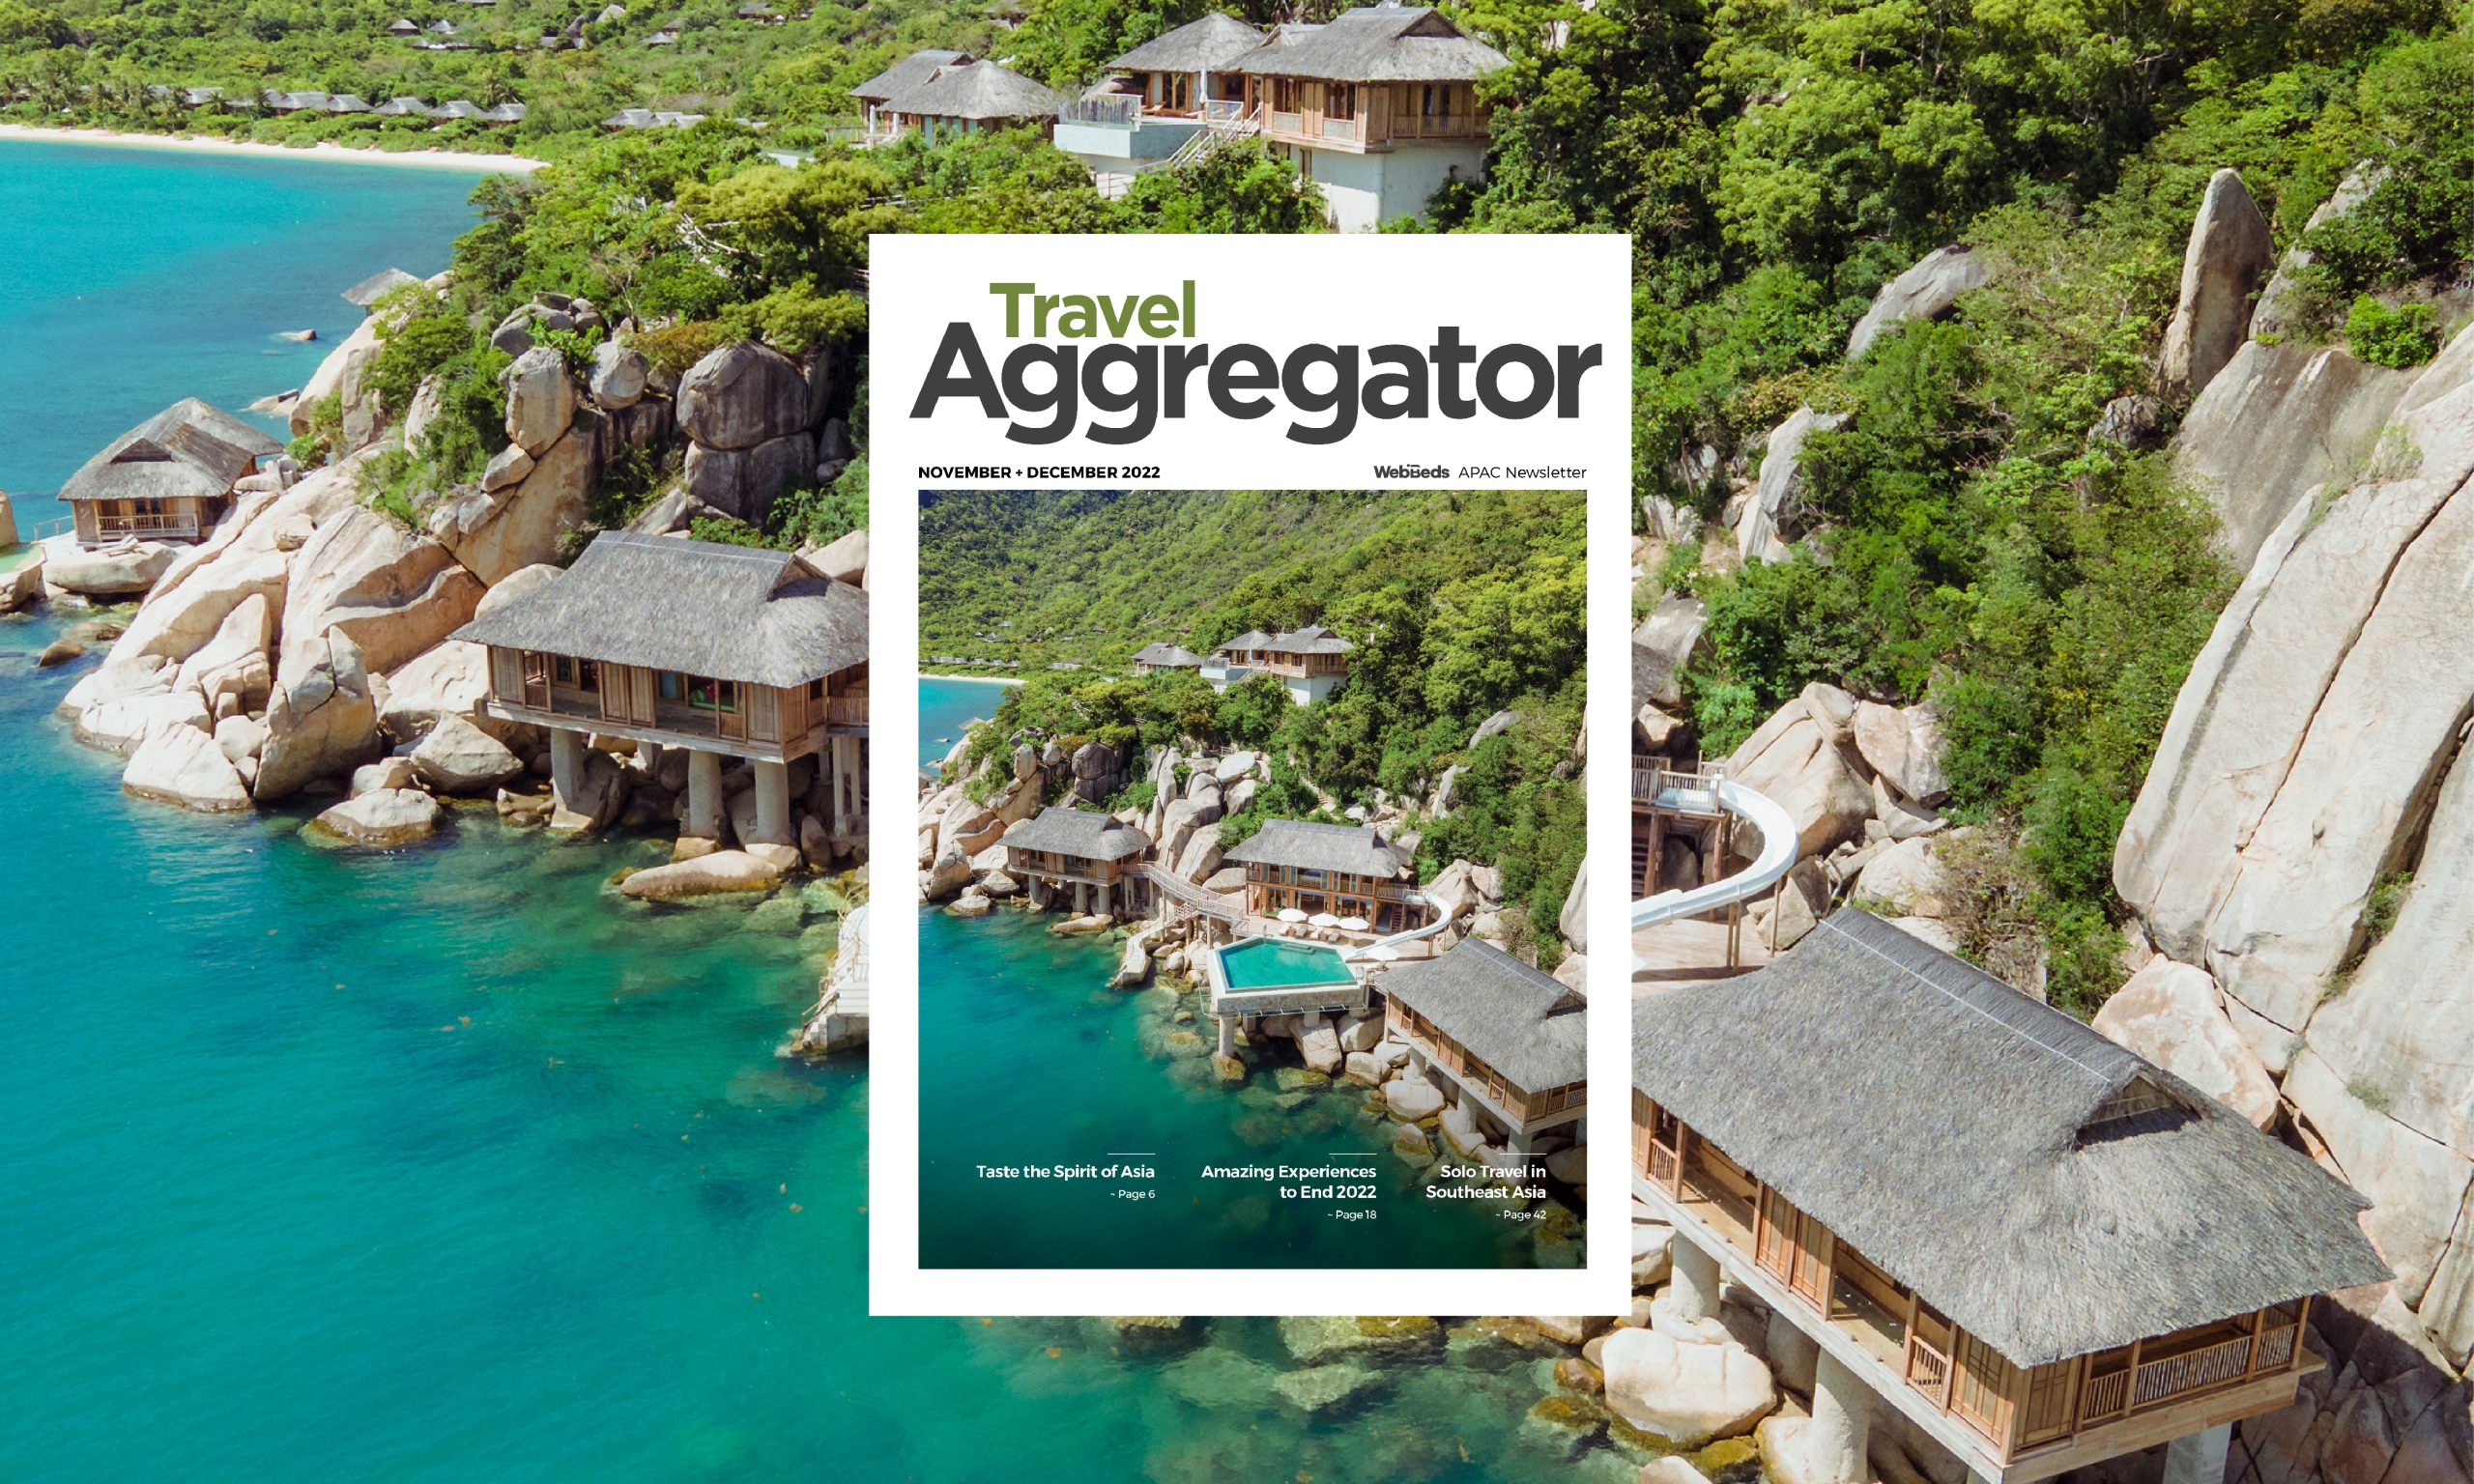 Travel Aggregator Magazine – November + December 2022 Edition Out Now